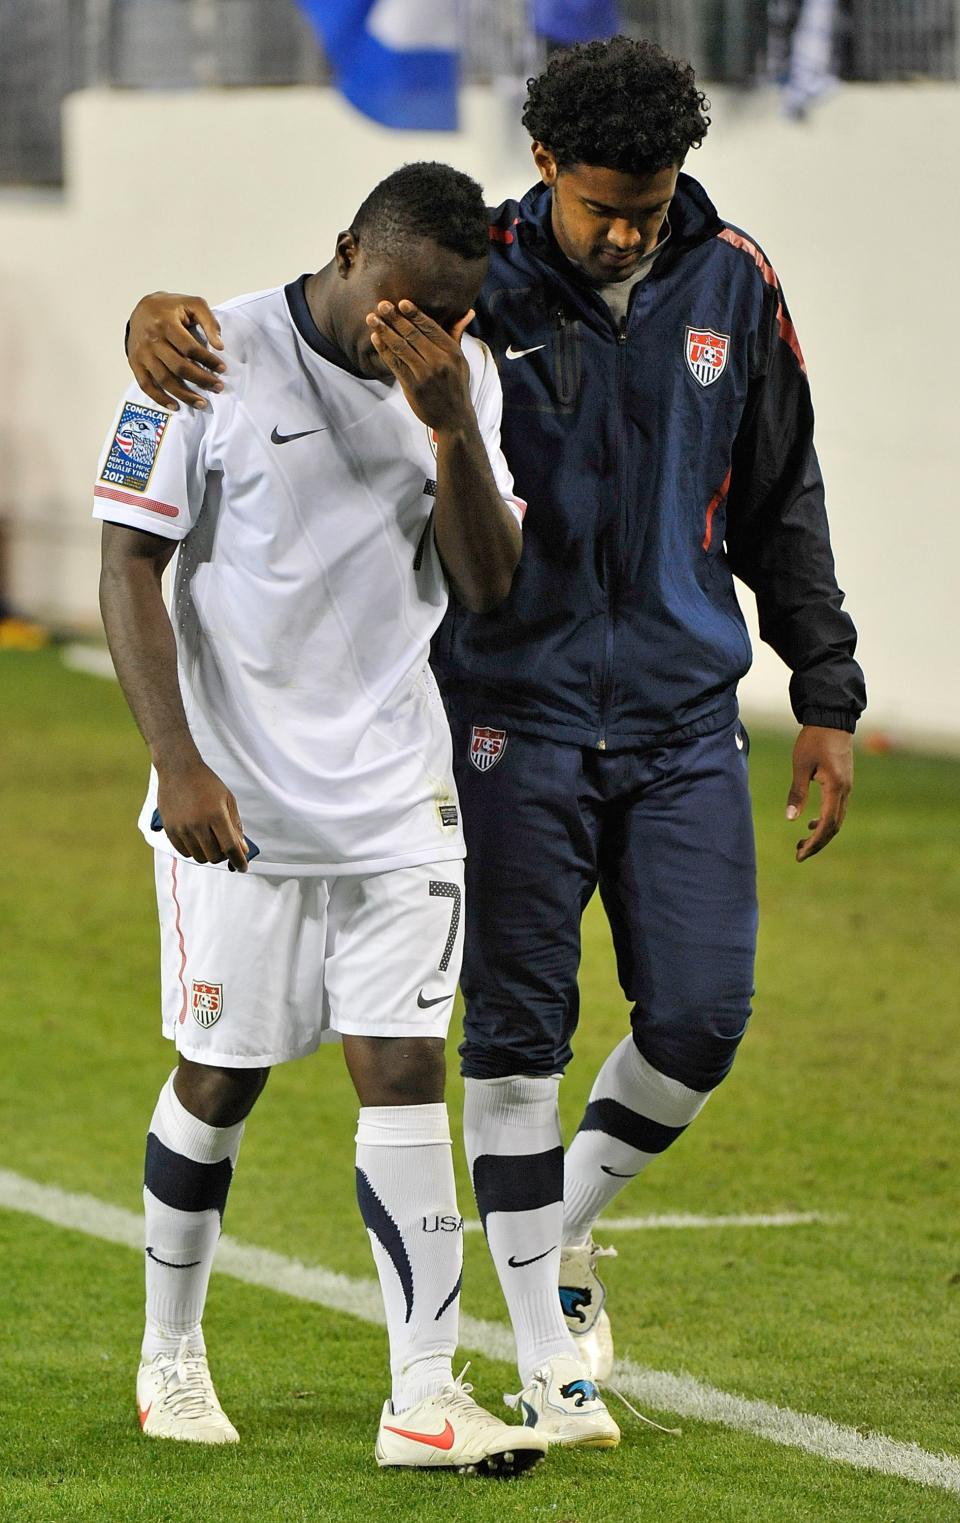 NASHVILLE, TN - MARCH 26: Freddy Adu #7 of the USA leaves the field after El Salvador ties the USA in a 2012 CONCACAF Men's Olympic Qualifying match at LP Field on March 26, 2012 in Nashville, Tennessee. (Photo by Frederick Breedon/Getty Images)